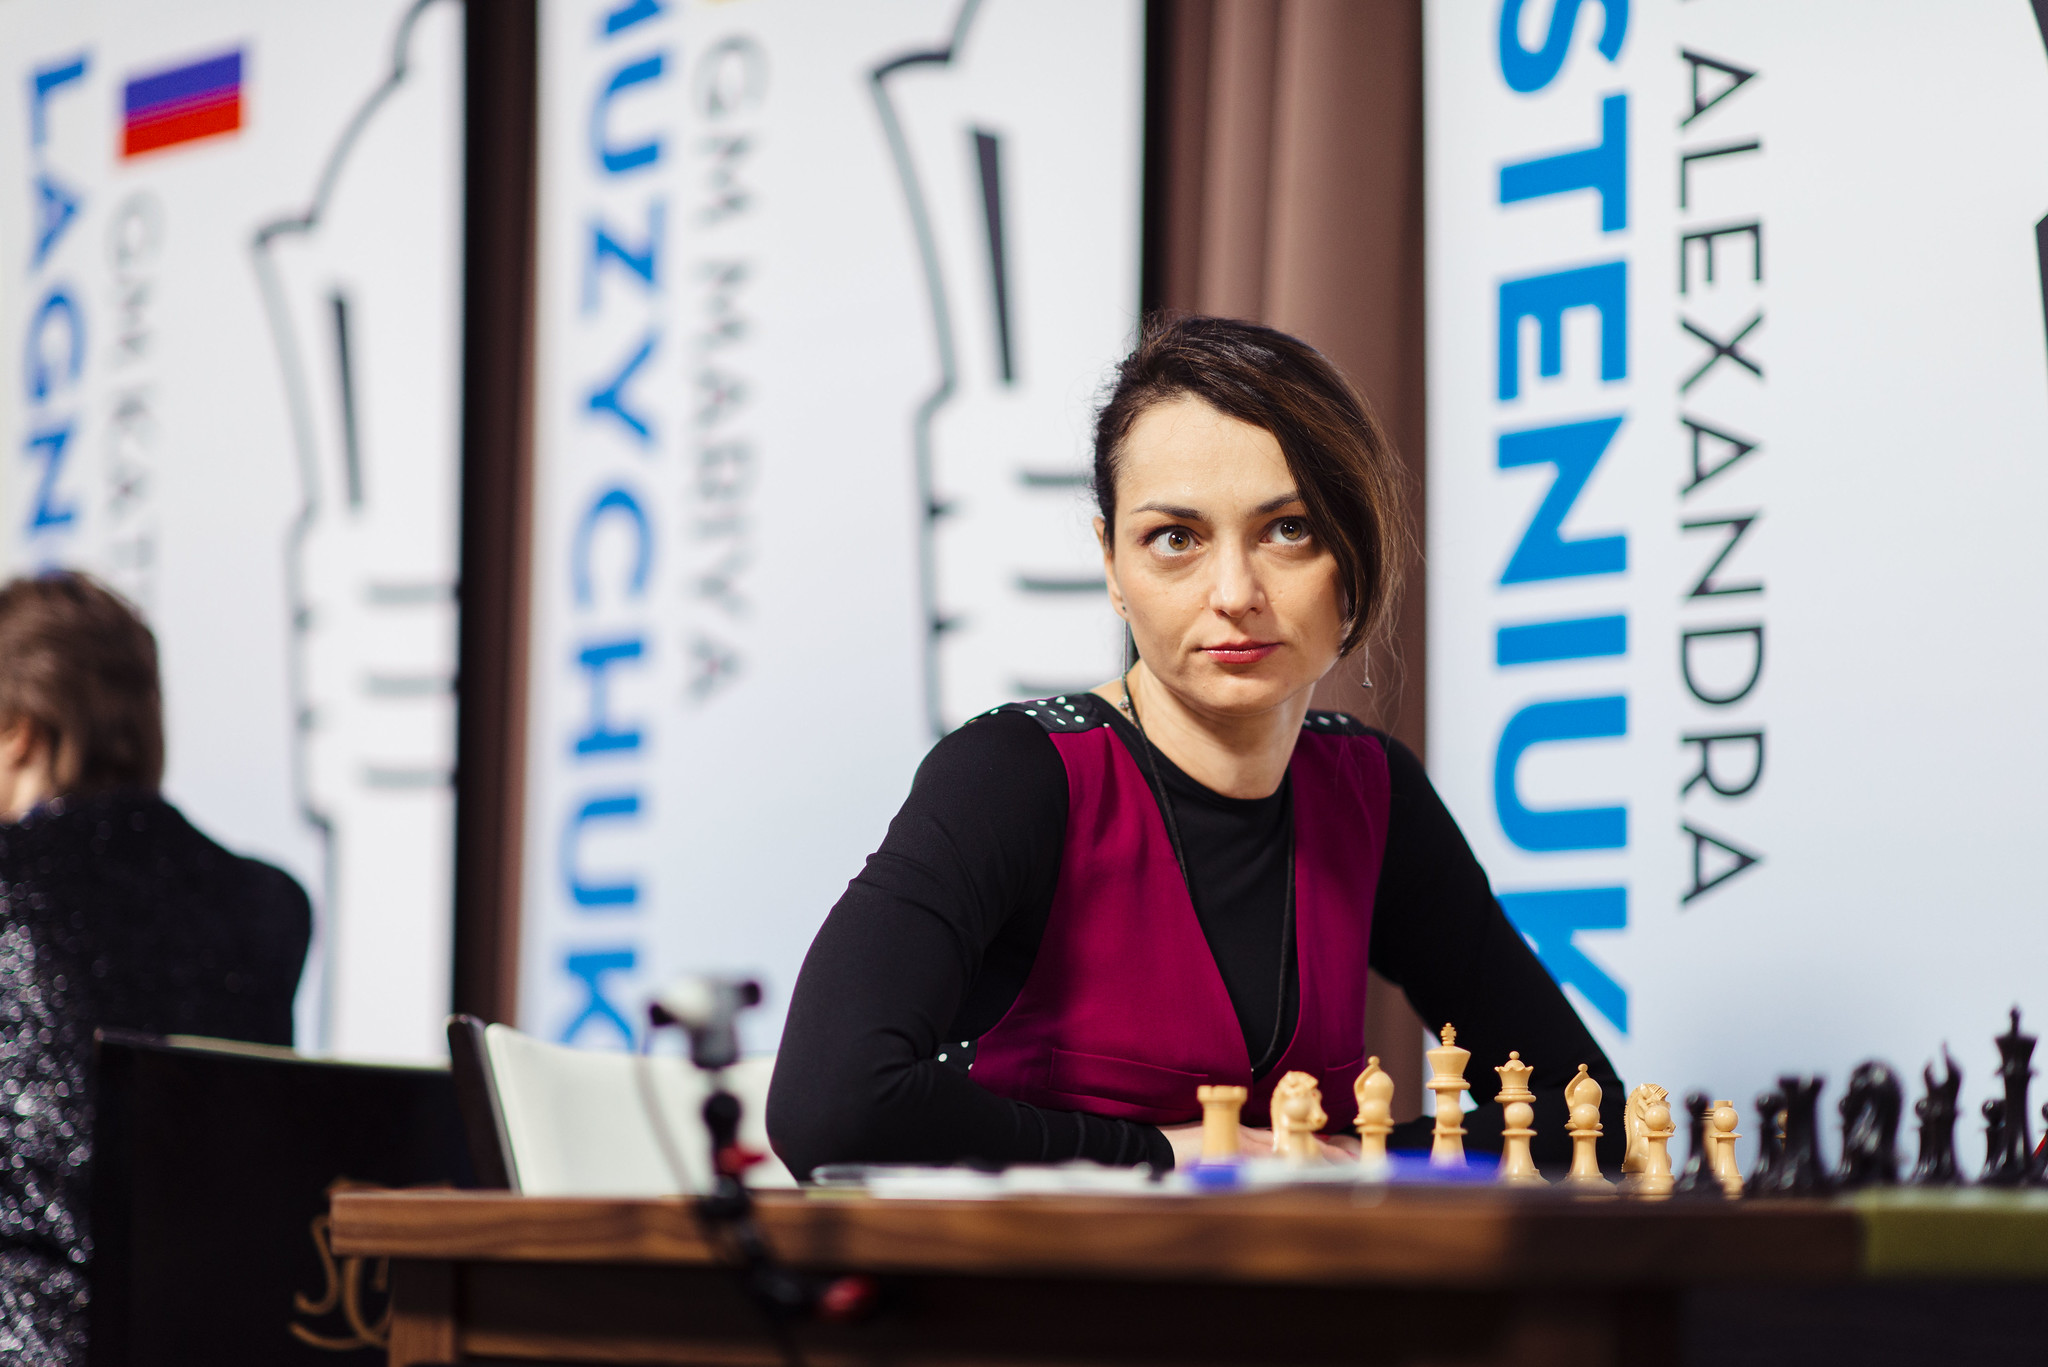 Russian GM Alexandra Kosteniuk will play for the Swiss Chess Federation